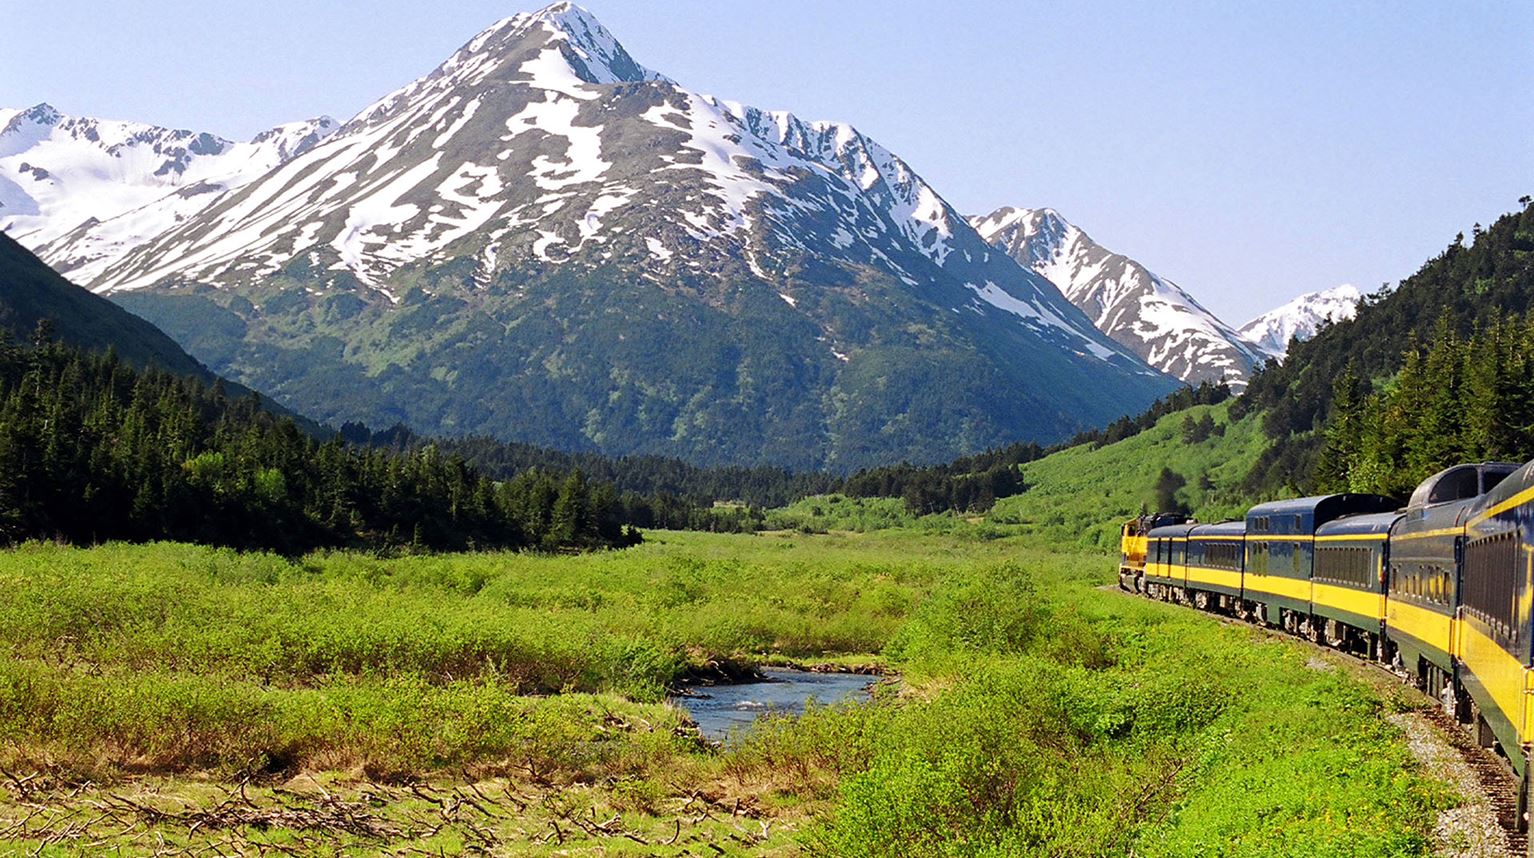 Panorama of a train traveling through the snow capped mountains, Denali National Park, Alaska